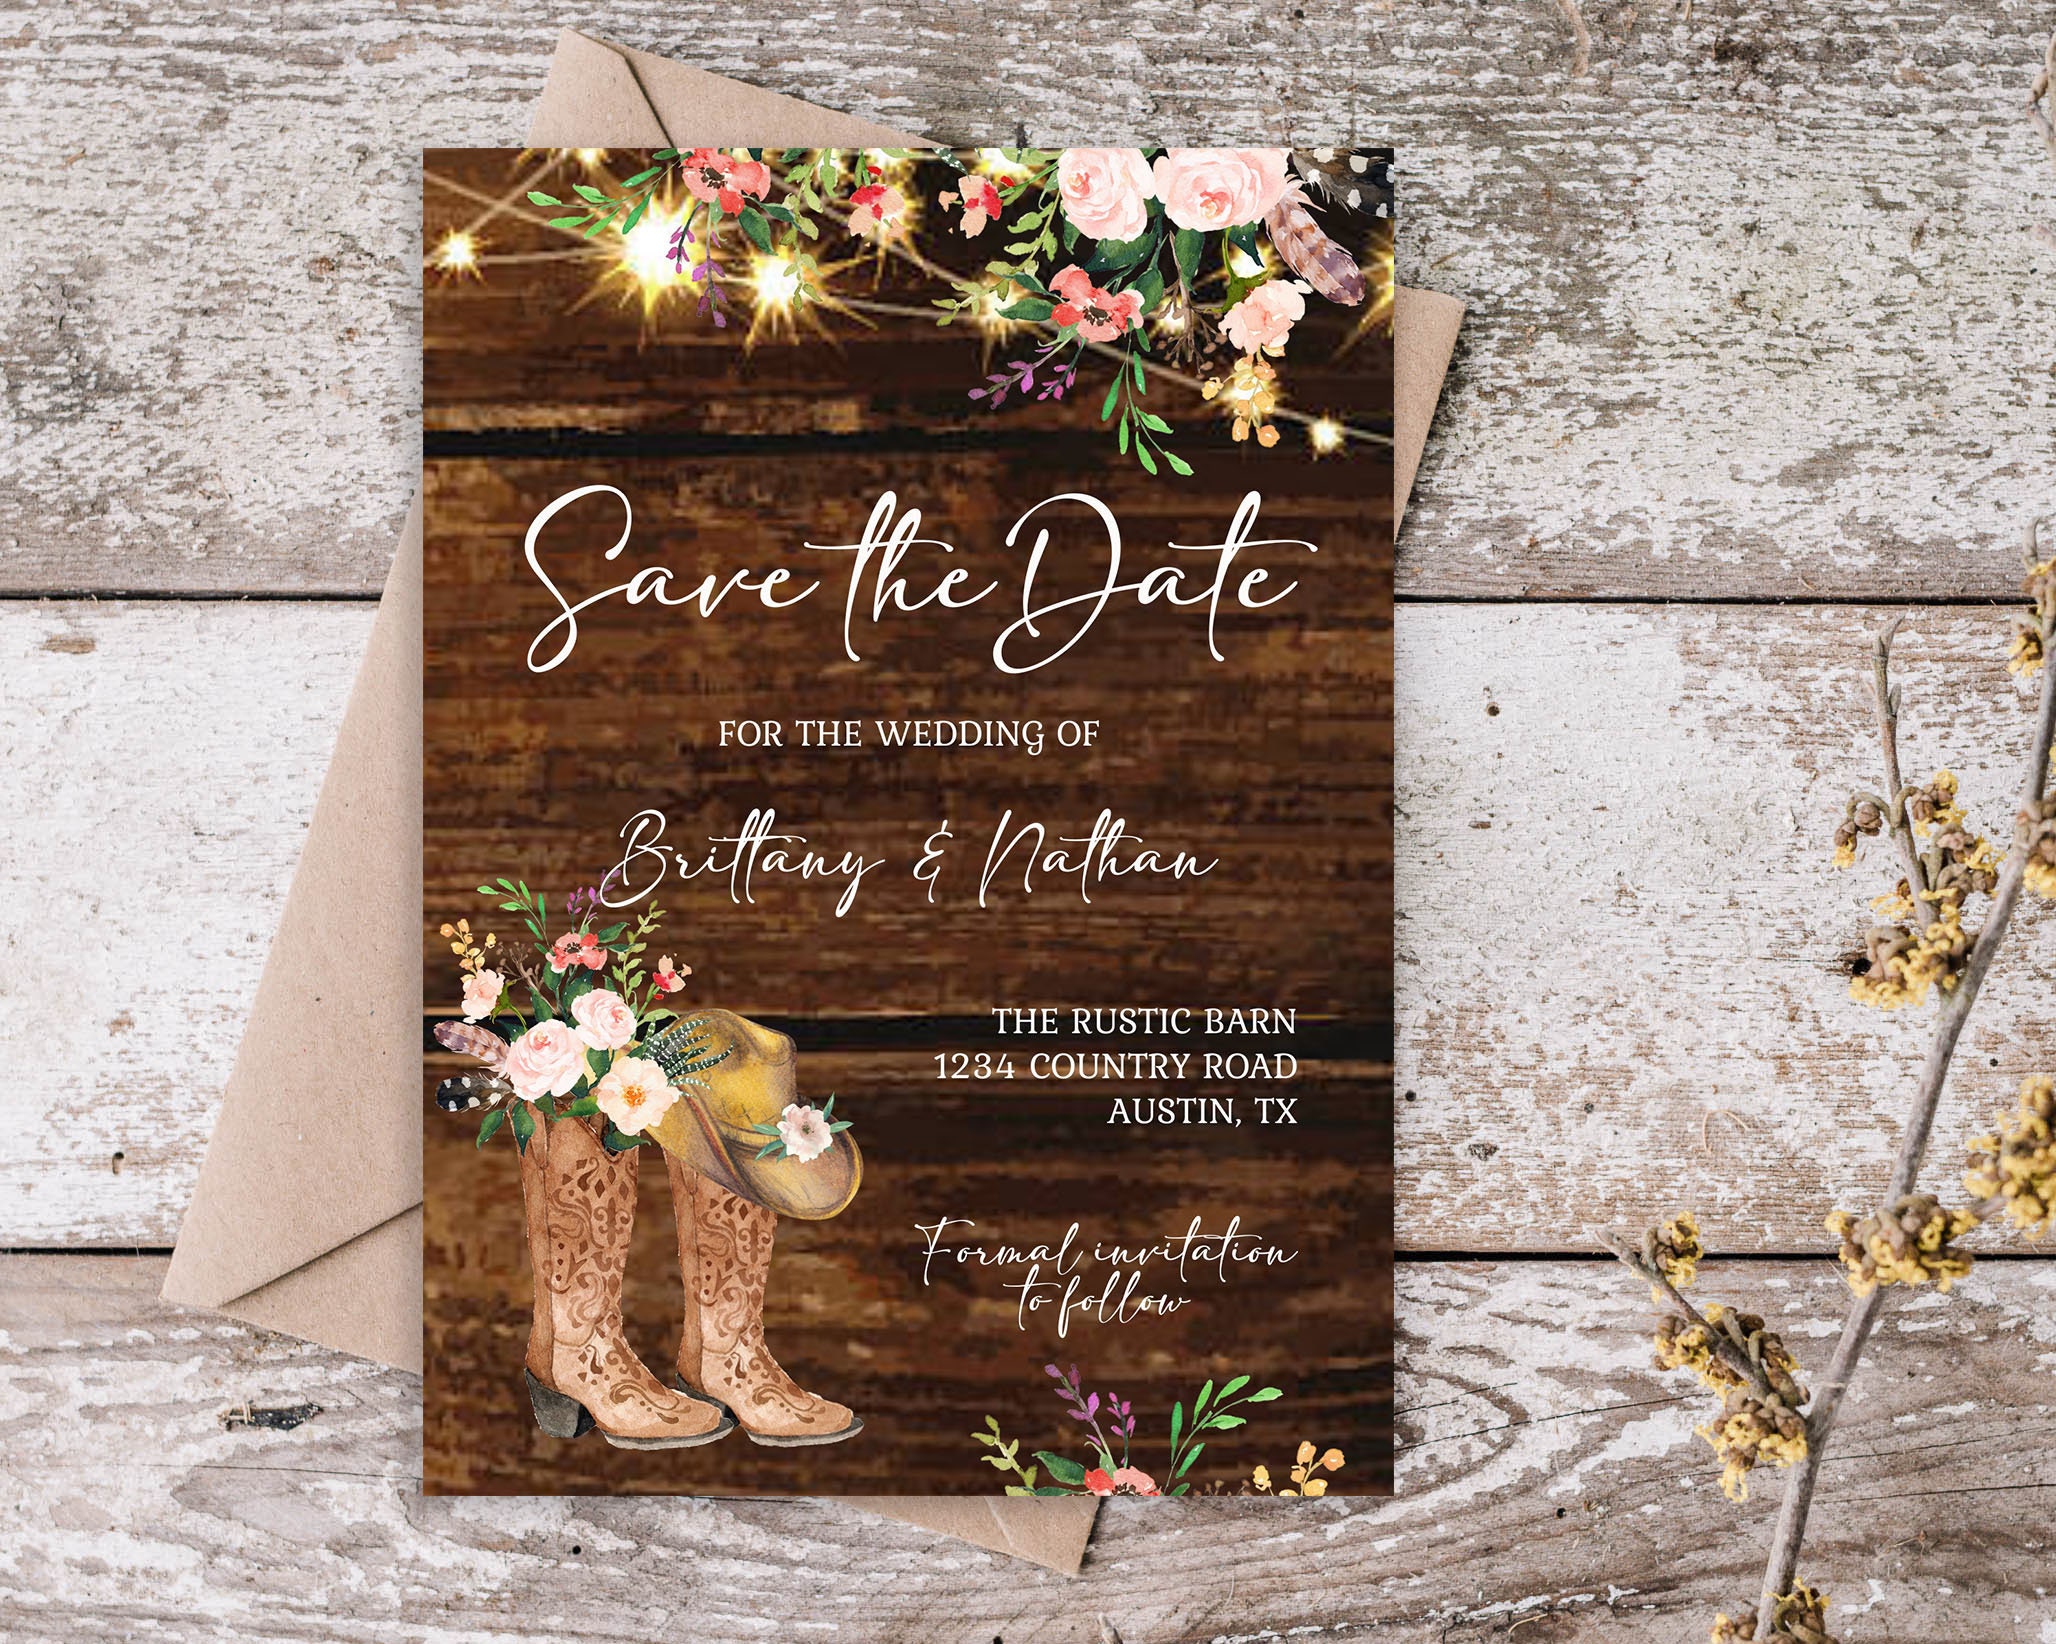 Rustic Chic Save The Date Photo Card - Create&Capture